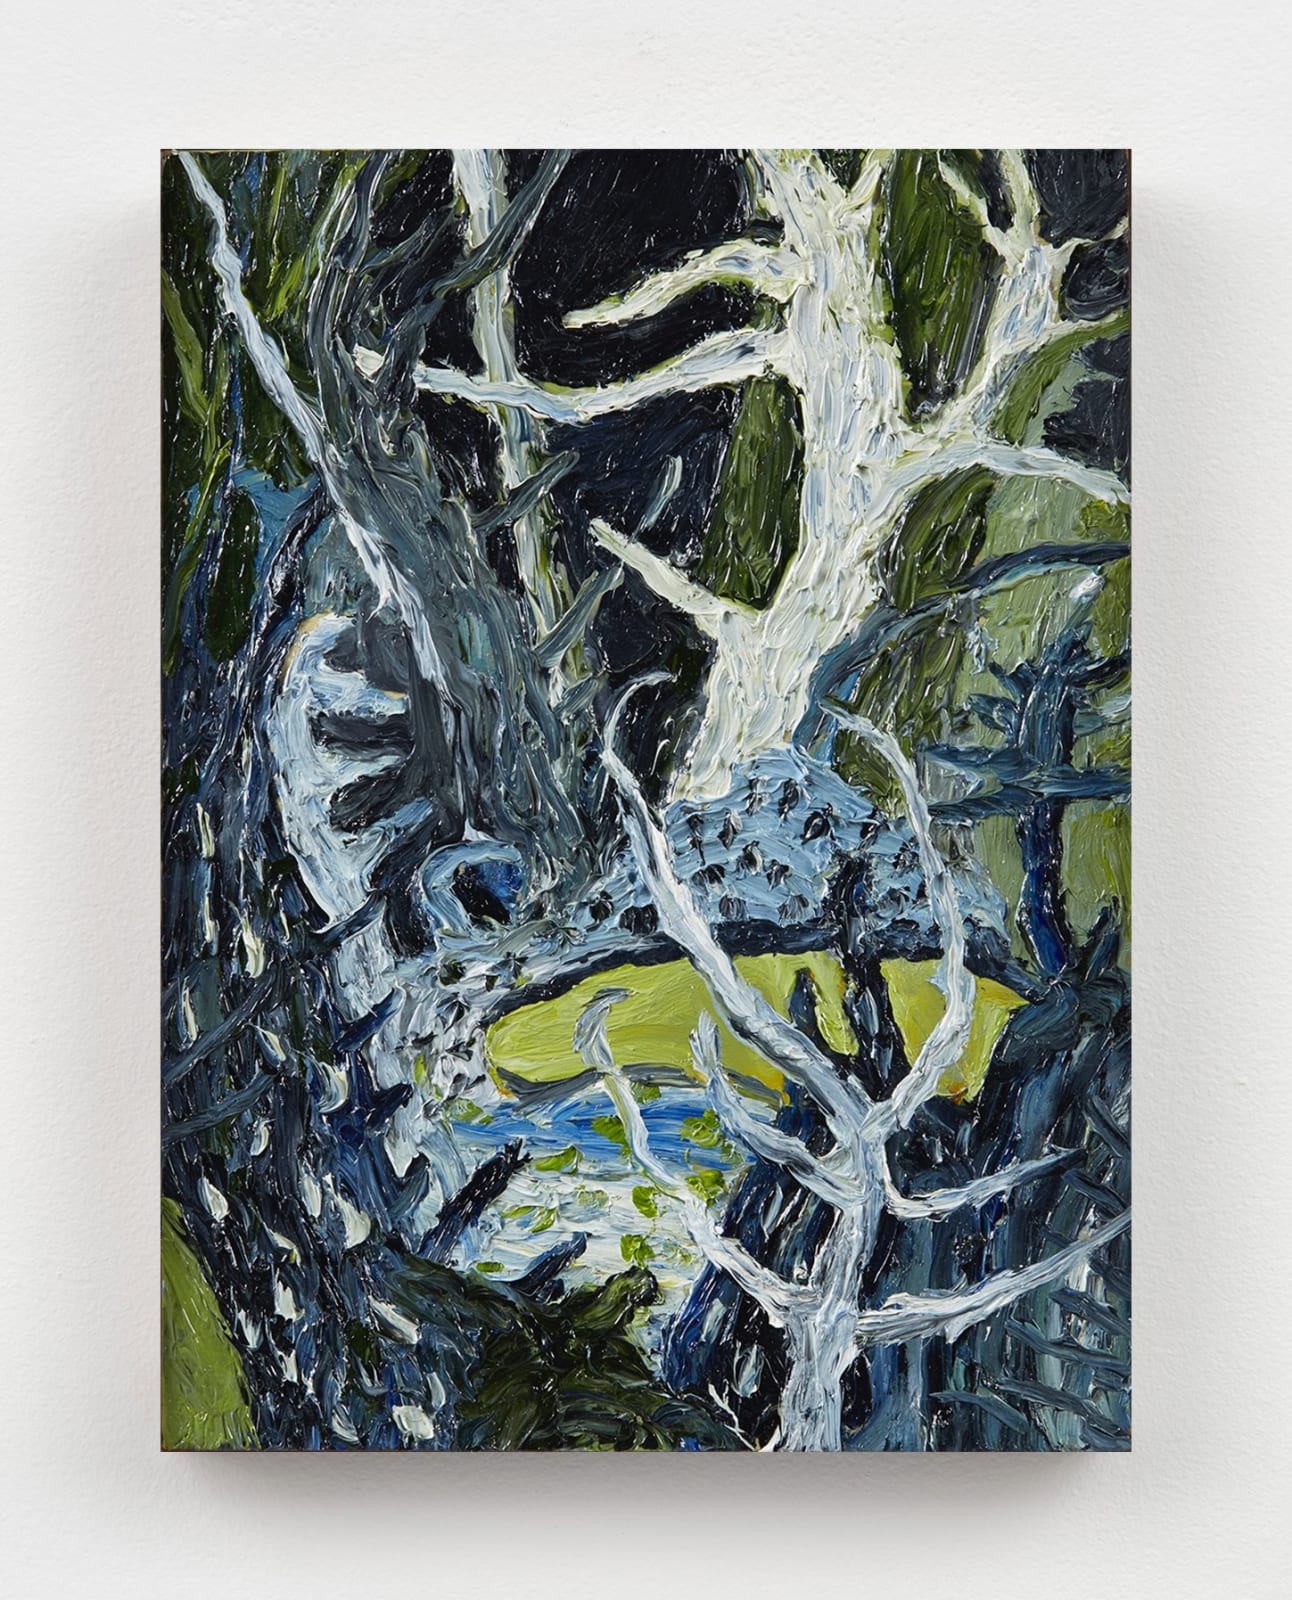 Thicket #2, 2021 Oil on wood panel 8 x 6 in. (20.3 x 15.2 cm.) (ML 29) SOLD